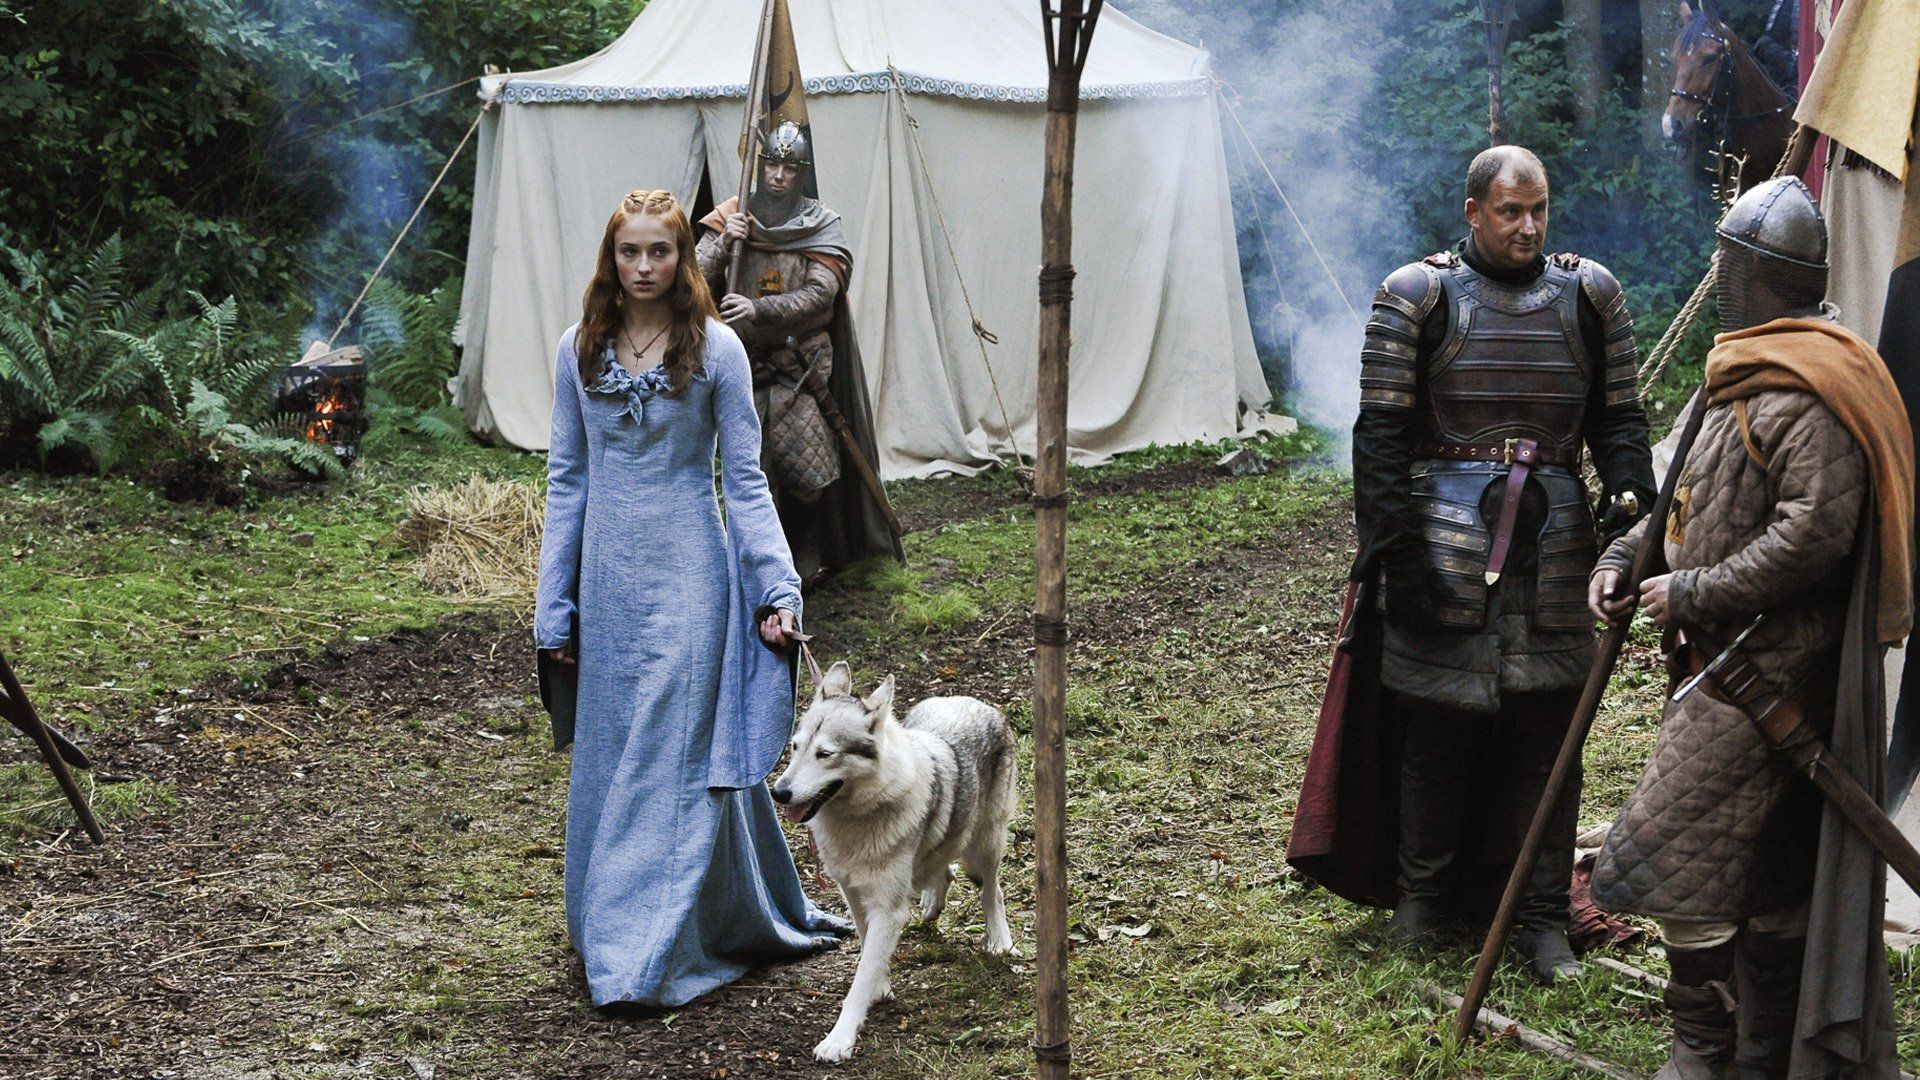 Game Of Thrones: 5 Worst Things That Have Happened To Sansa (And The 5 Worst Things She’s Done)